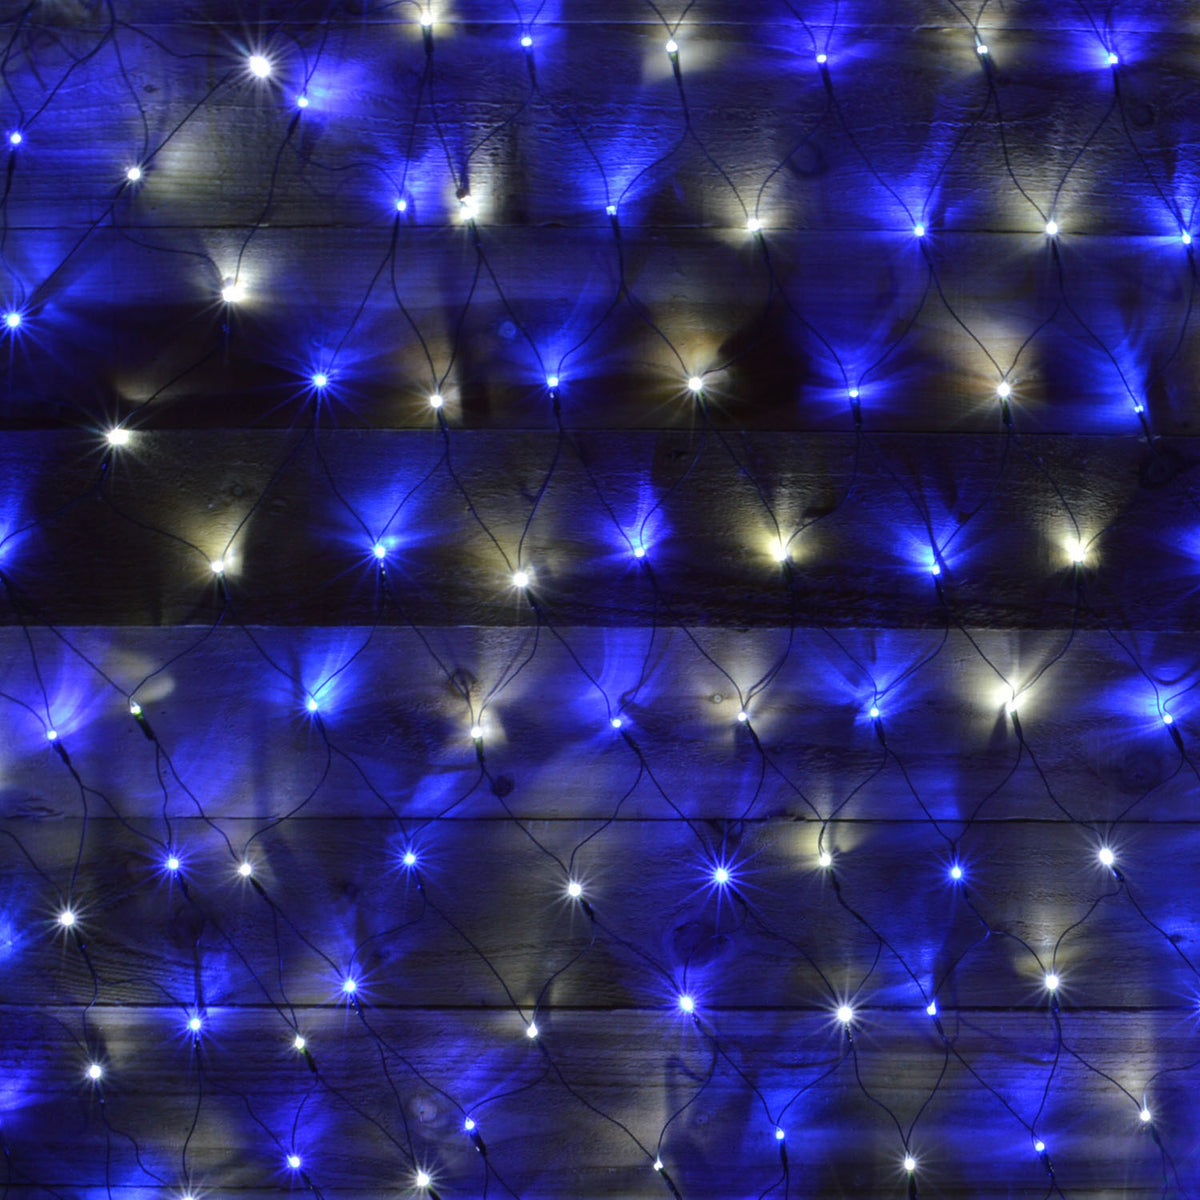 1.7m x 1.2m 180 LED Premier Indoor Outdoor Multifunction Christmas Net Light with Timer in Blue & White